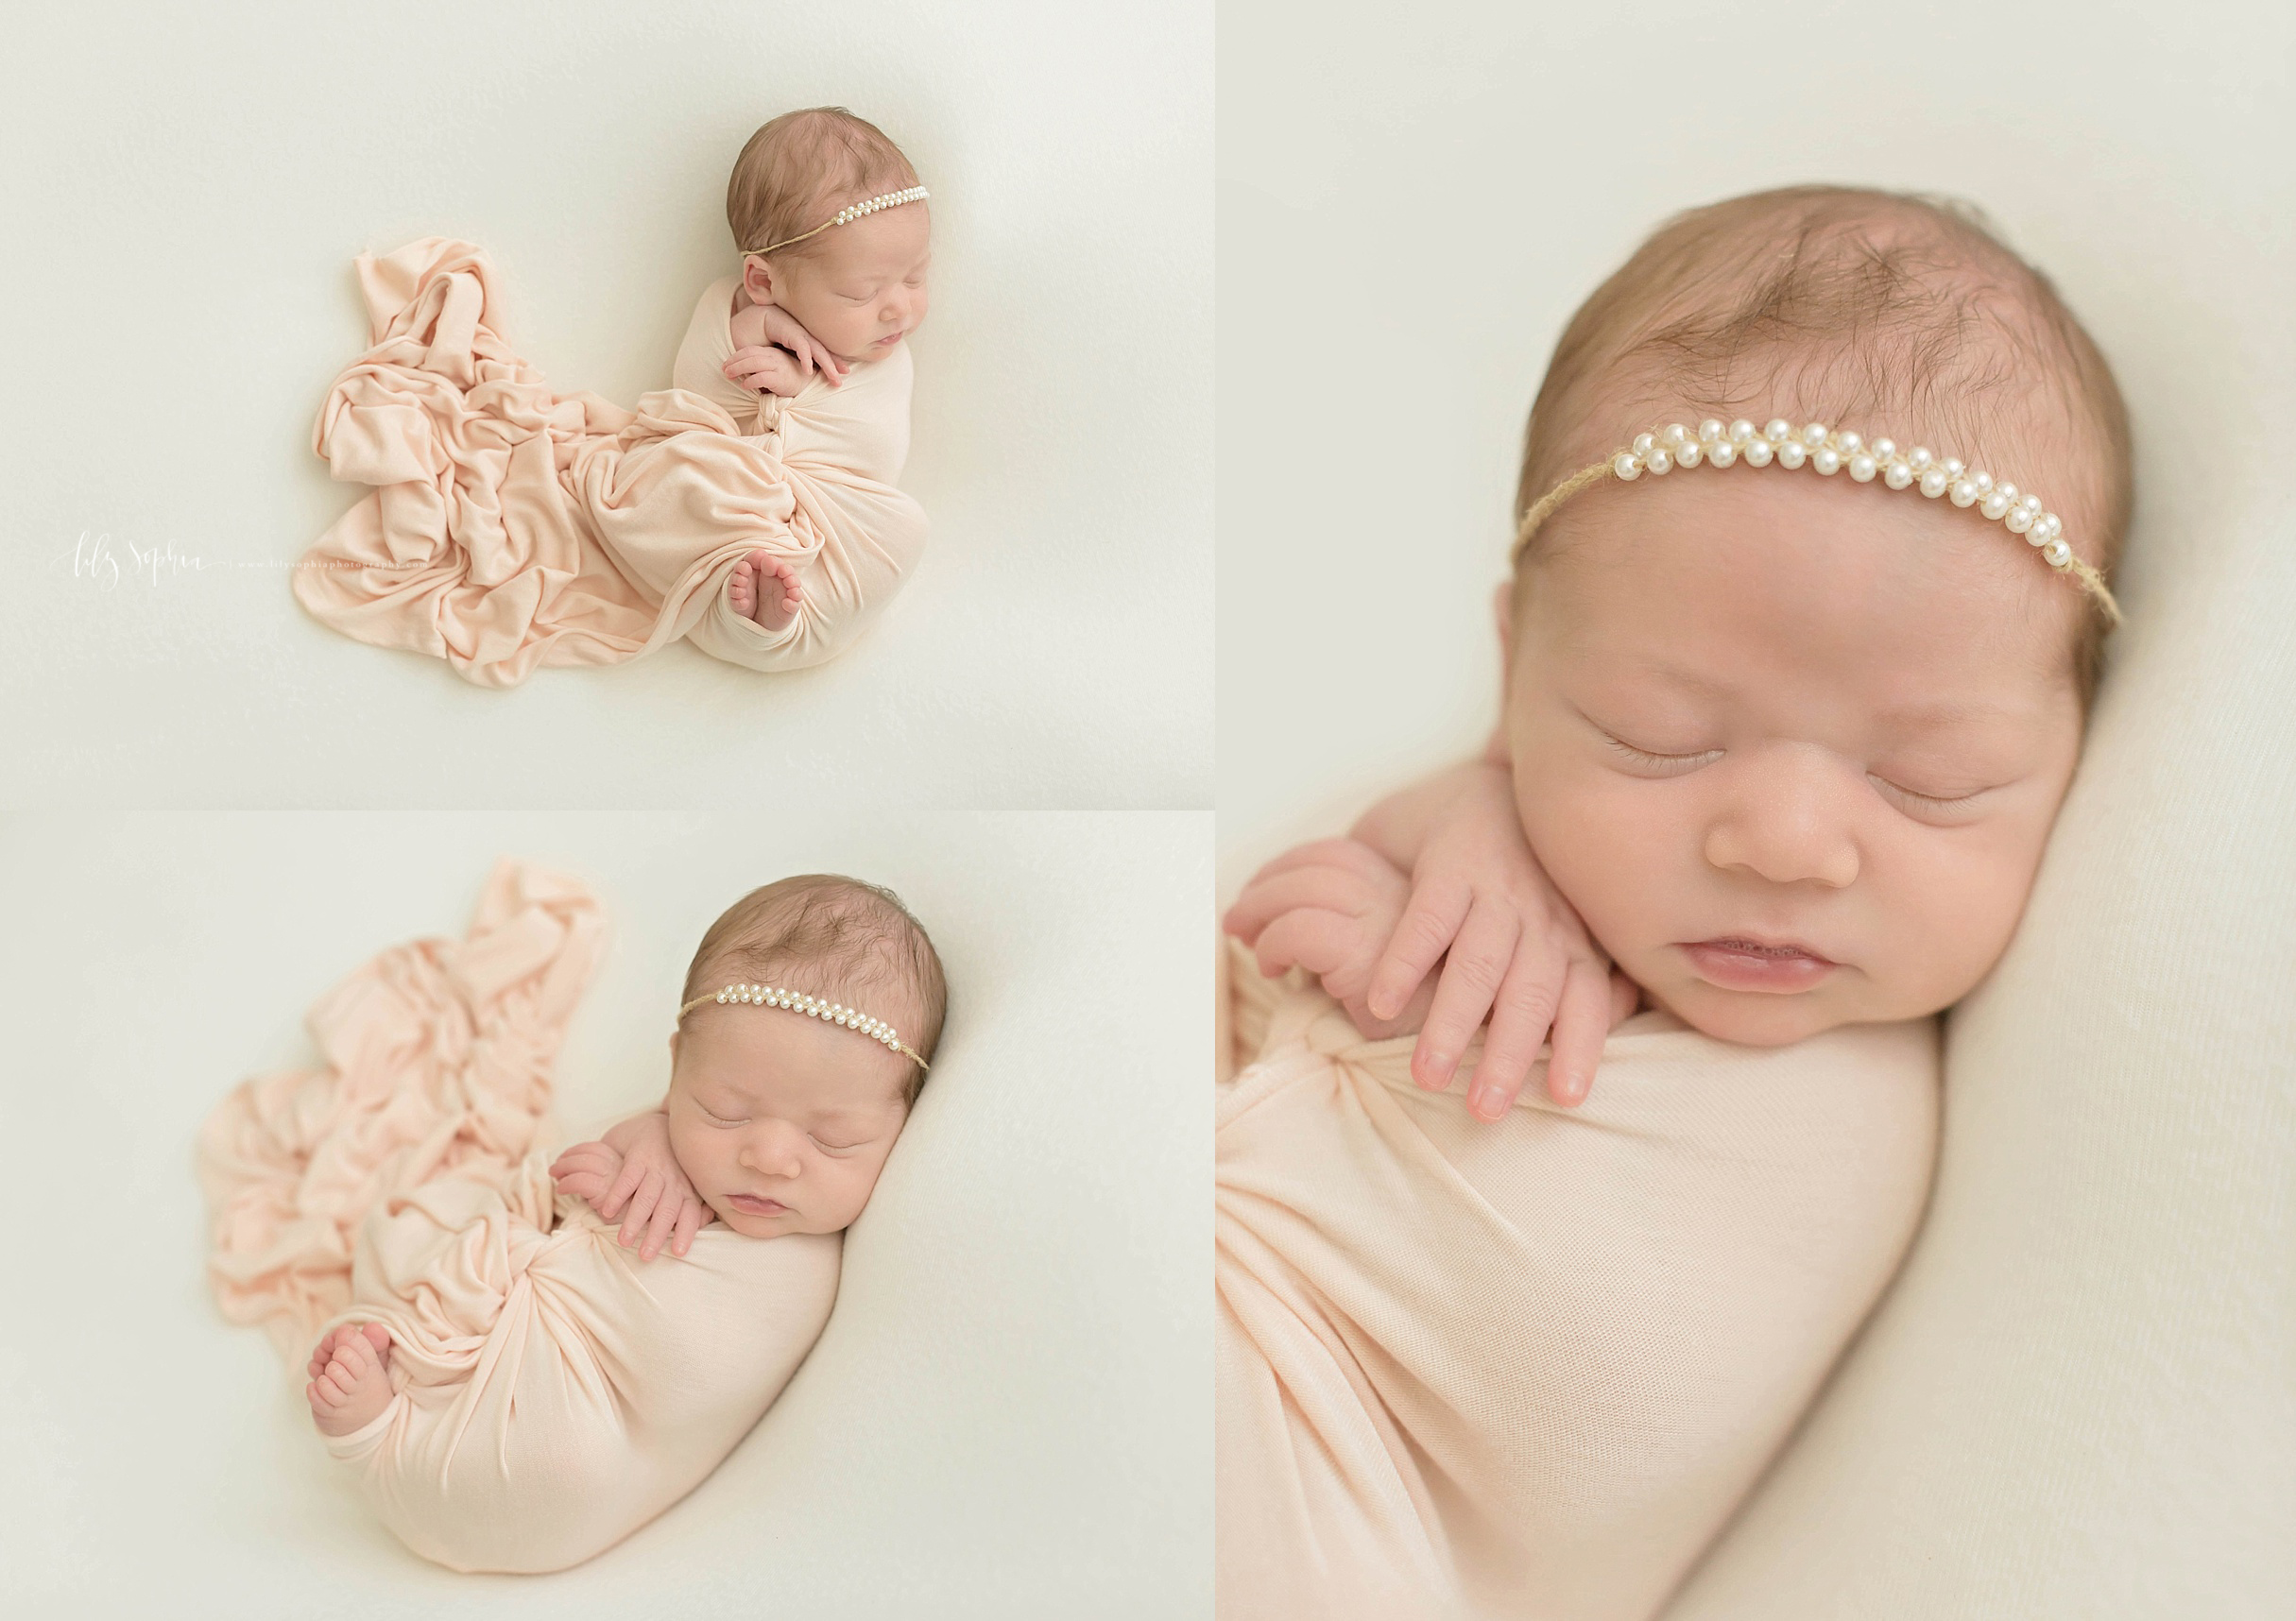  Image collage of a newborn, baby, girl, wrapped in a pink wrap, with her hands and her feet sticking out, wearing a pearl headband in her hair.&nbsp; 